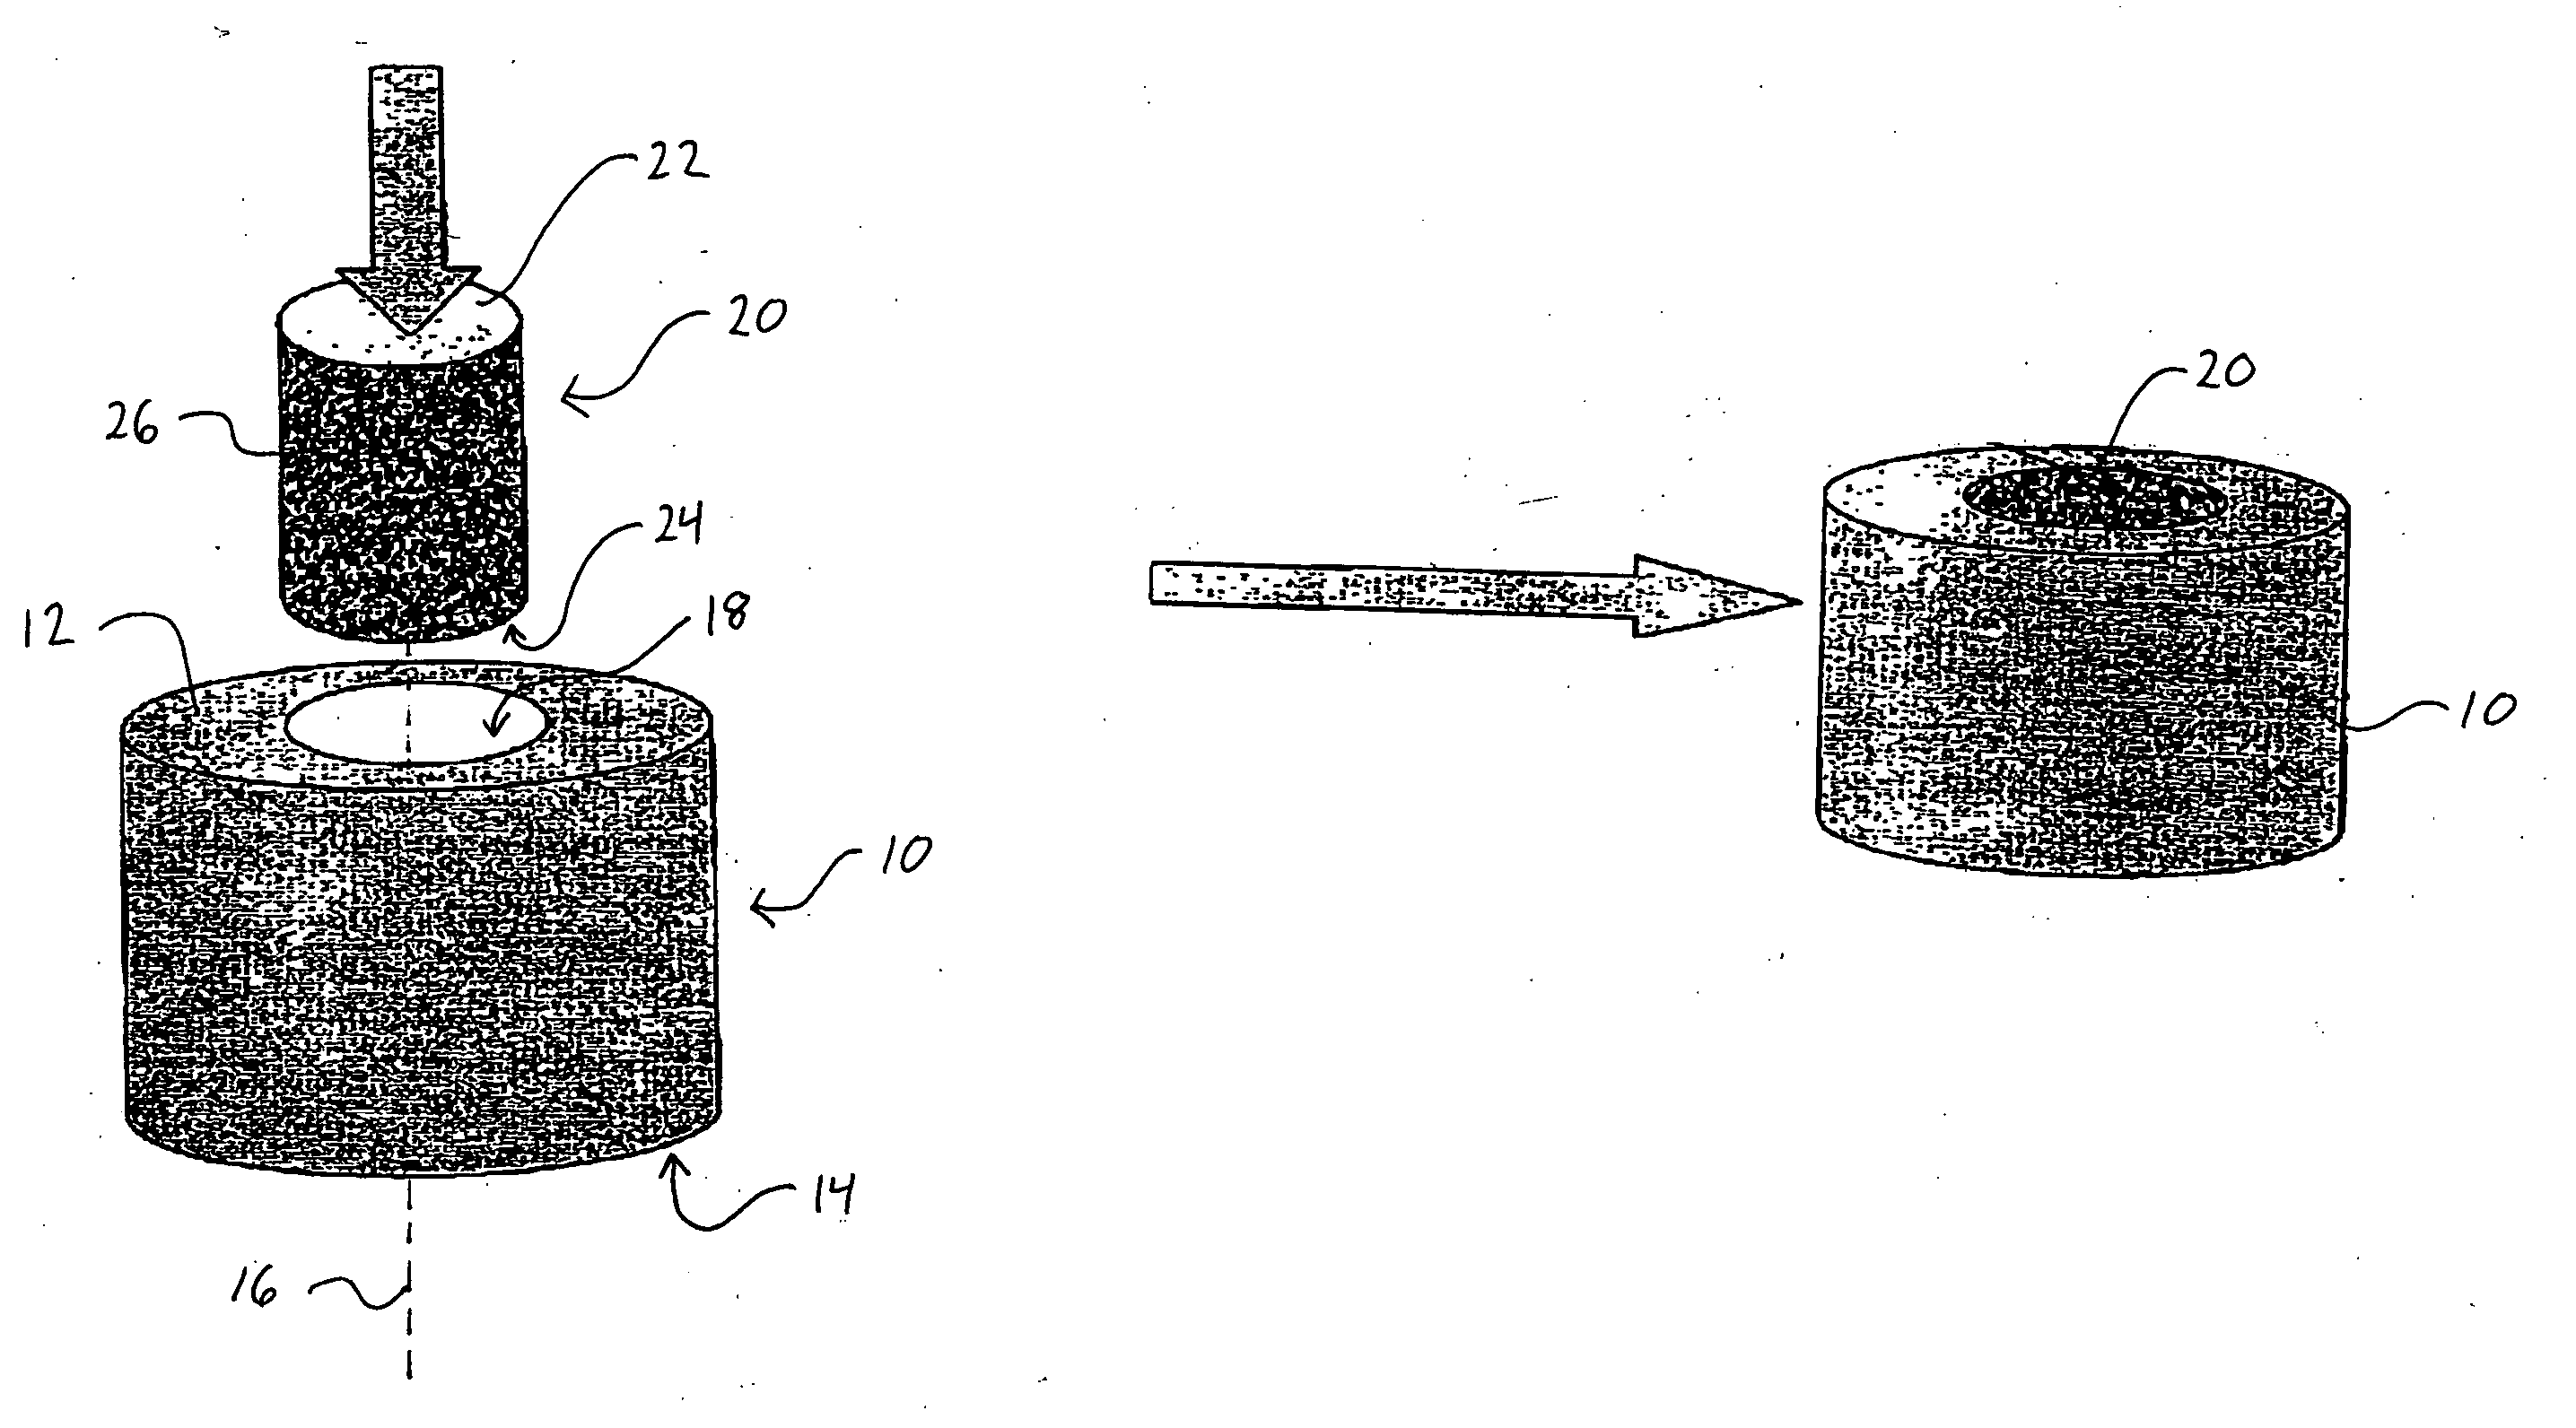 Osteoconductive integrated spinal cage and method of making same